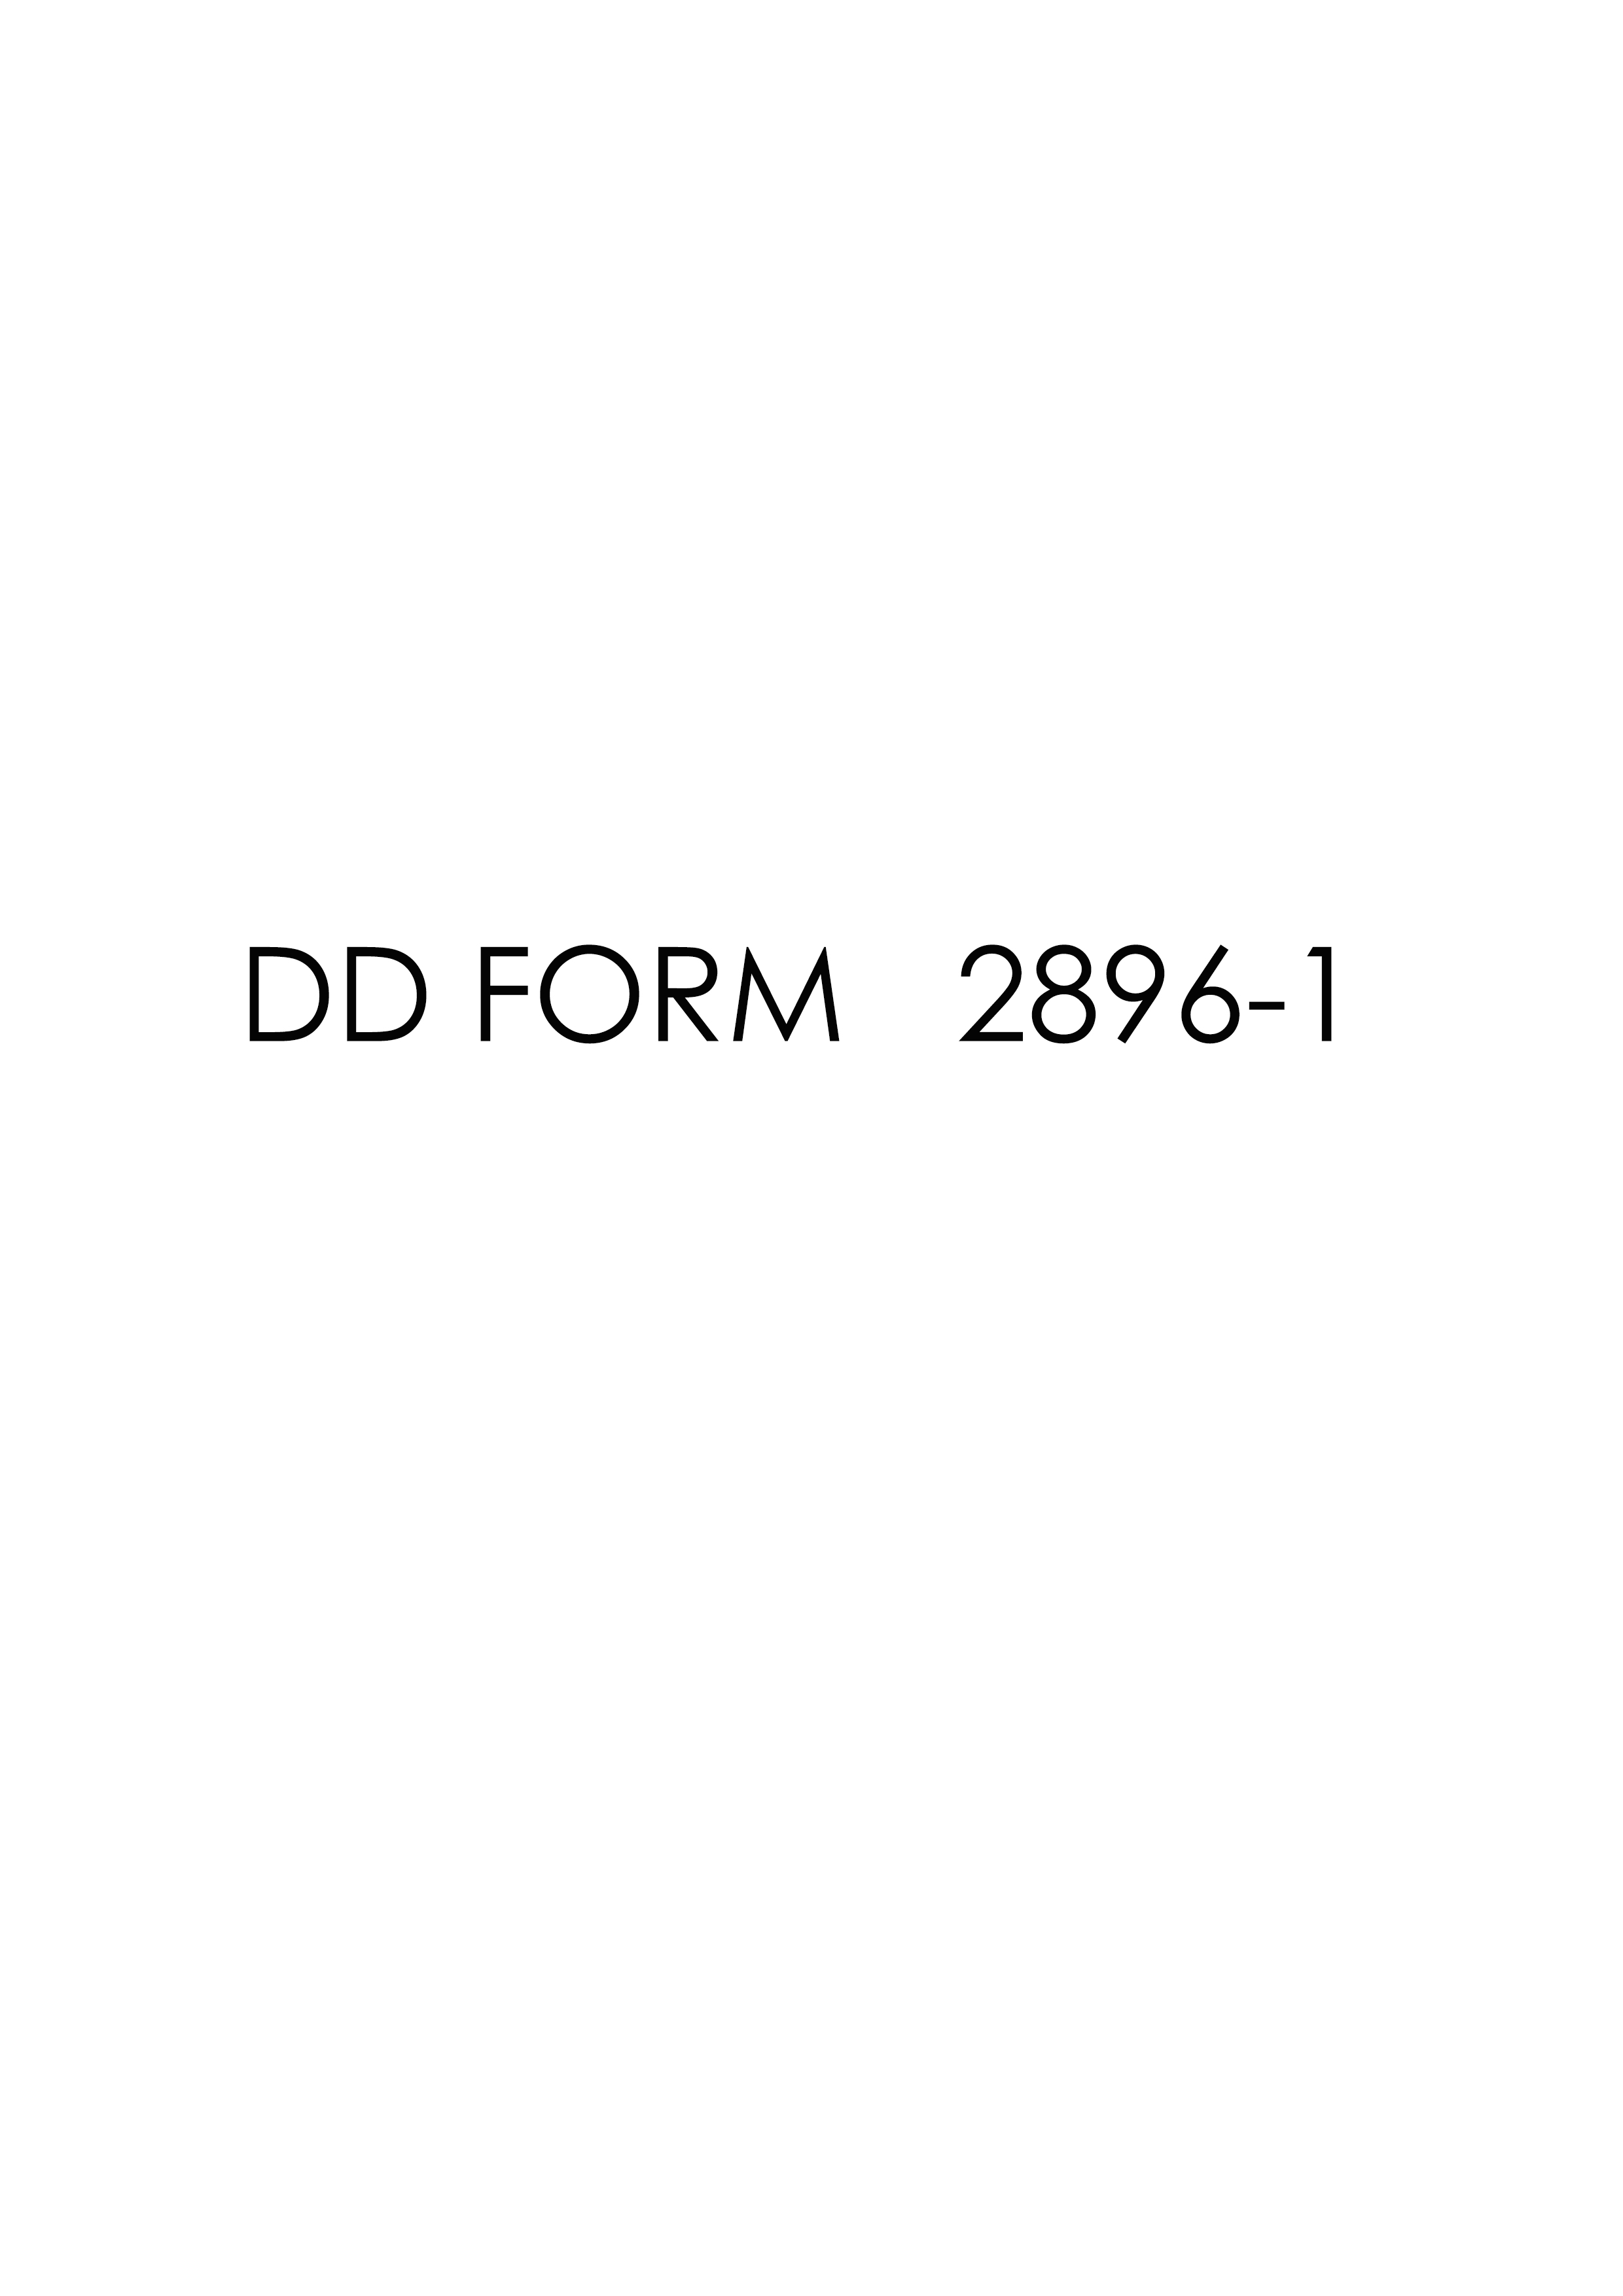 Download Fillable dd Form 2896-1